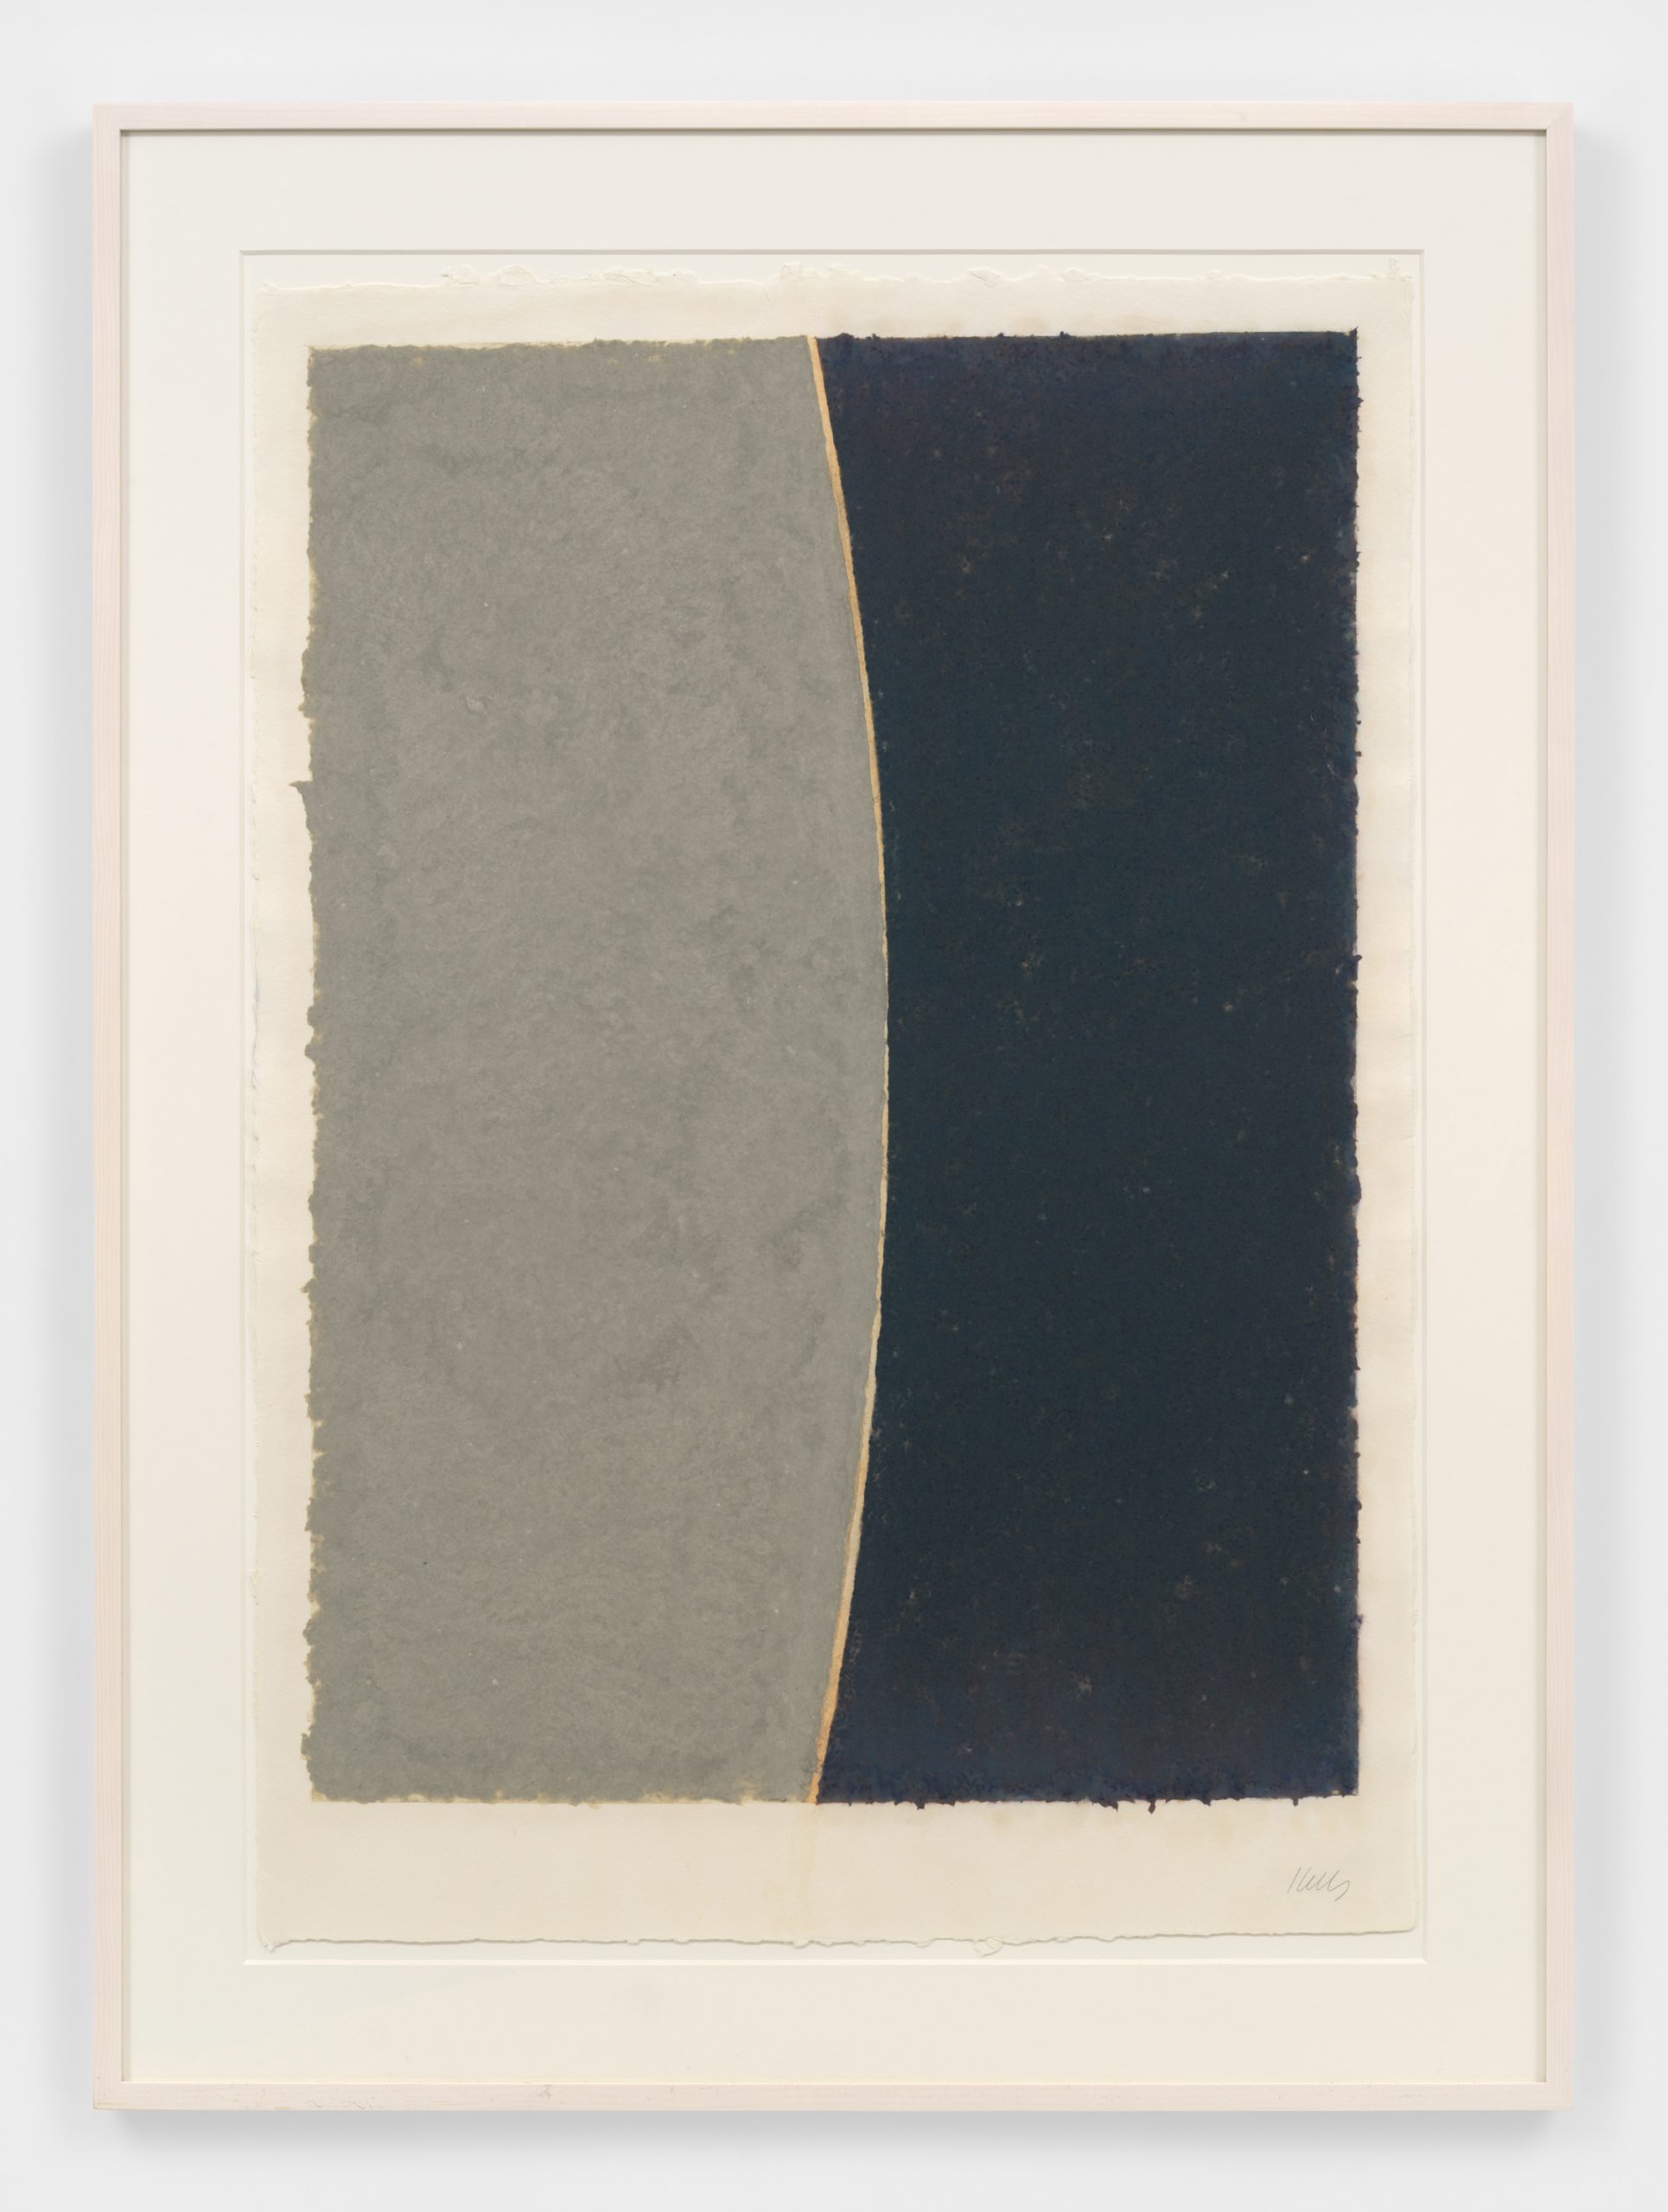 Colored Paper Image VIII (Gray Curve with Blue) by Ellsworth Kelly